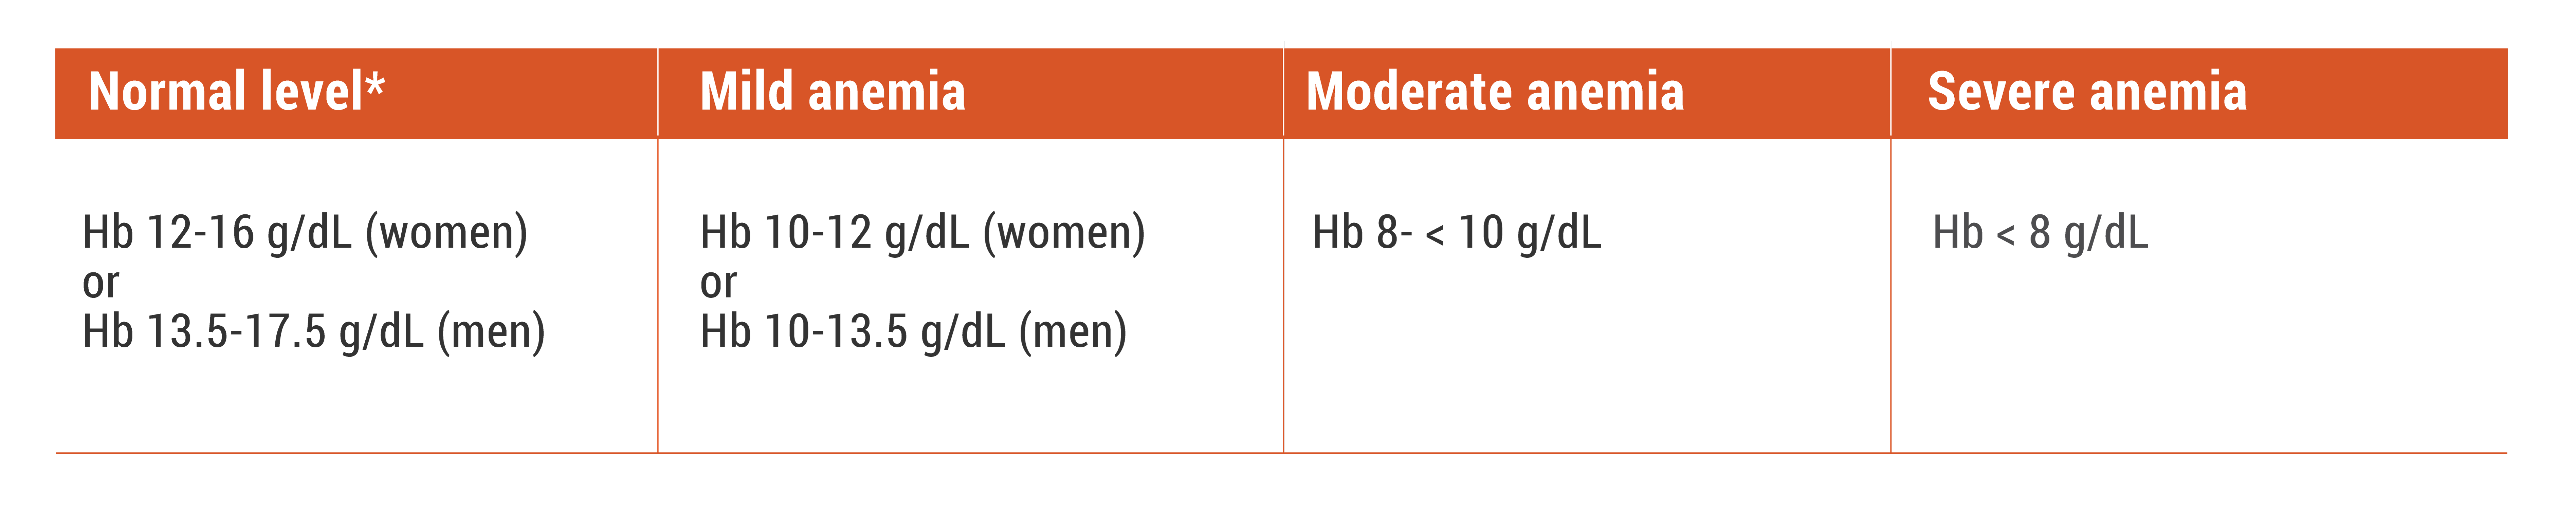 Normal levels of hemoglobin are 12-16 g/dL for women and 13.5-17.5 g/dL for men. In mild anemia, hemoglobin levels are 10 g/dL for women and 10-13.5 g/dL for men. In moderate anemia, hemoglobin levels are 8- < 10 g/dL. In severe anemia, hemoglobin levels are < 8 g/dL.